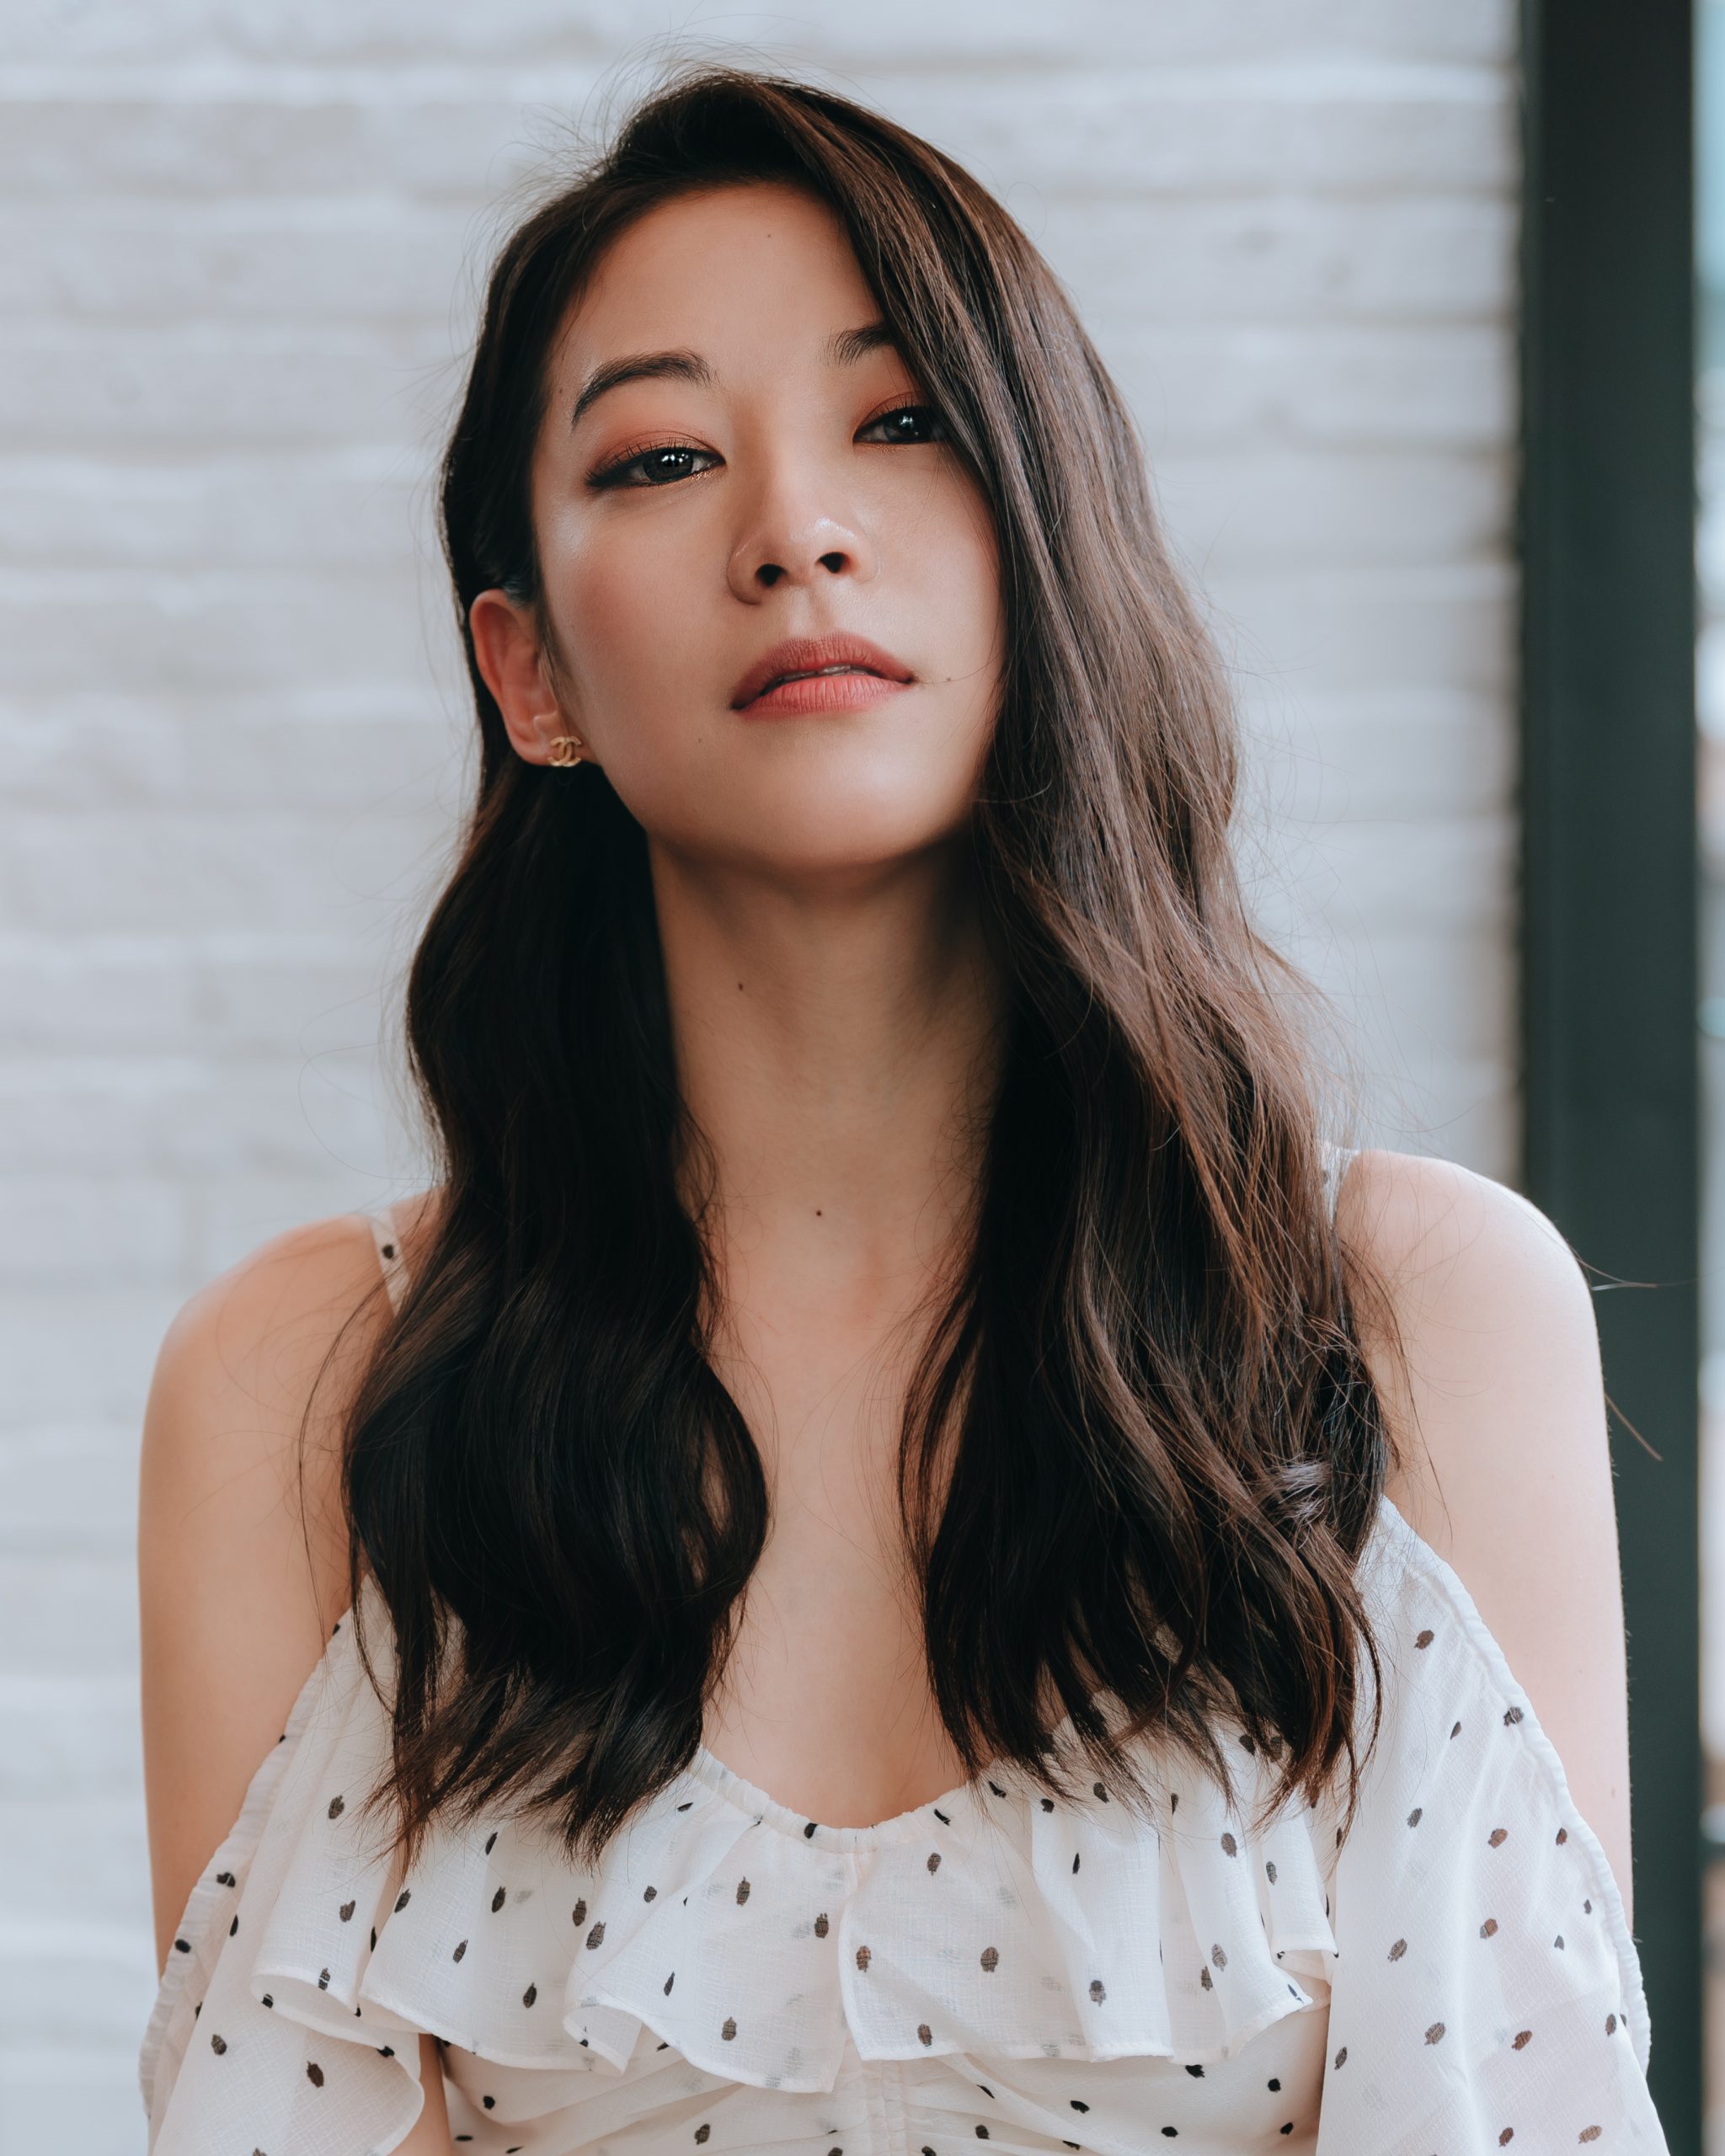 What are the lesser known facts about Arden Cho